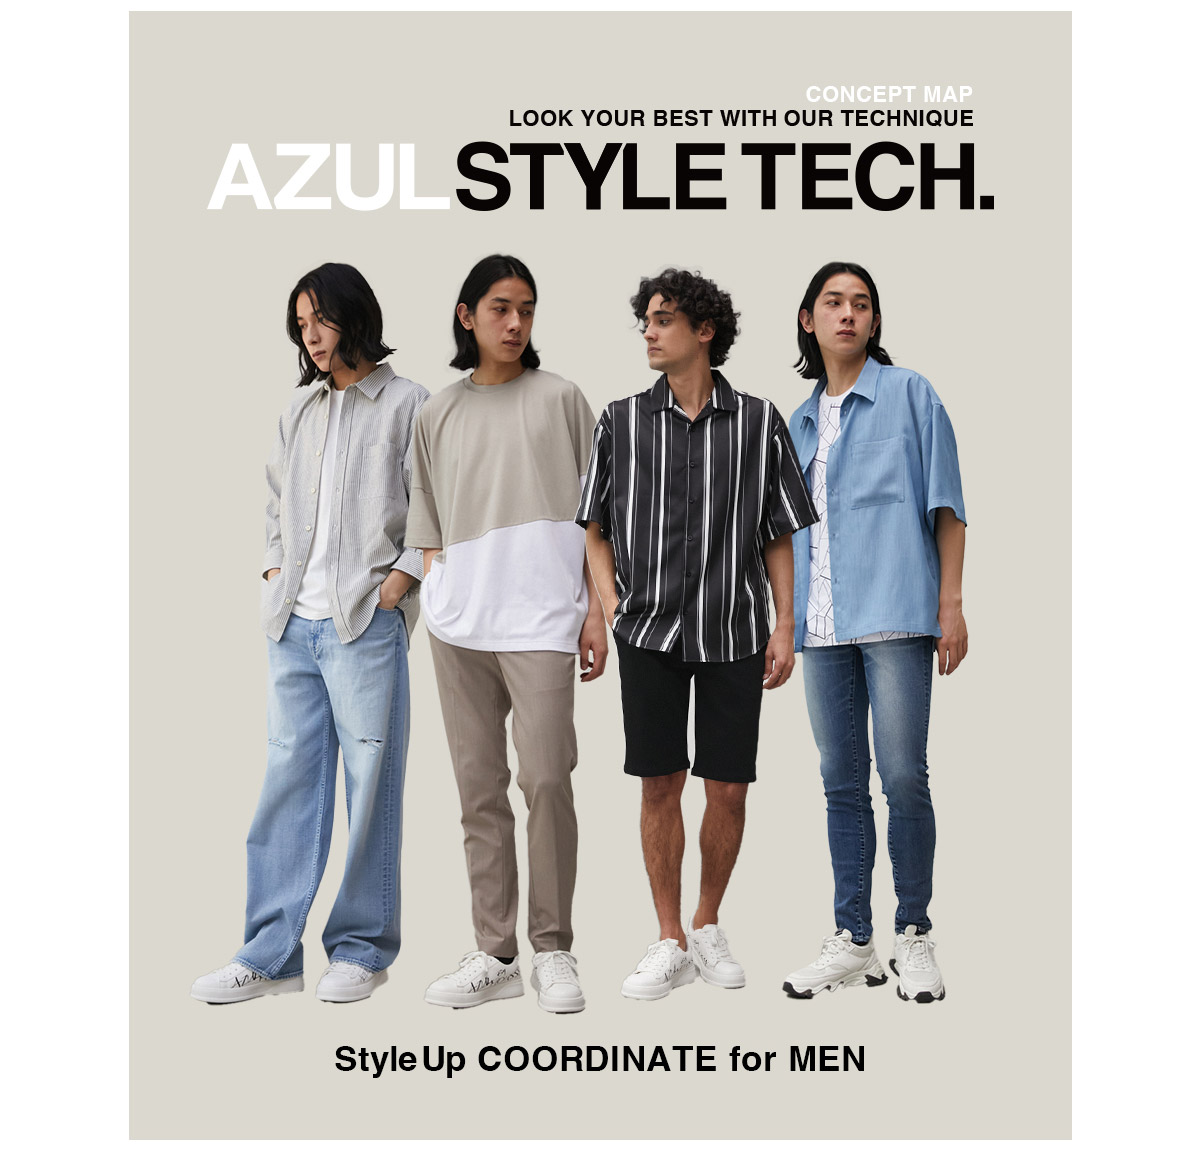 AZUL STYLE TECH. Style Up COORDINATE for MEN